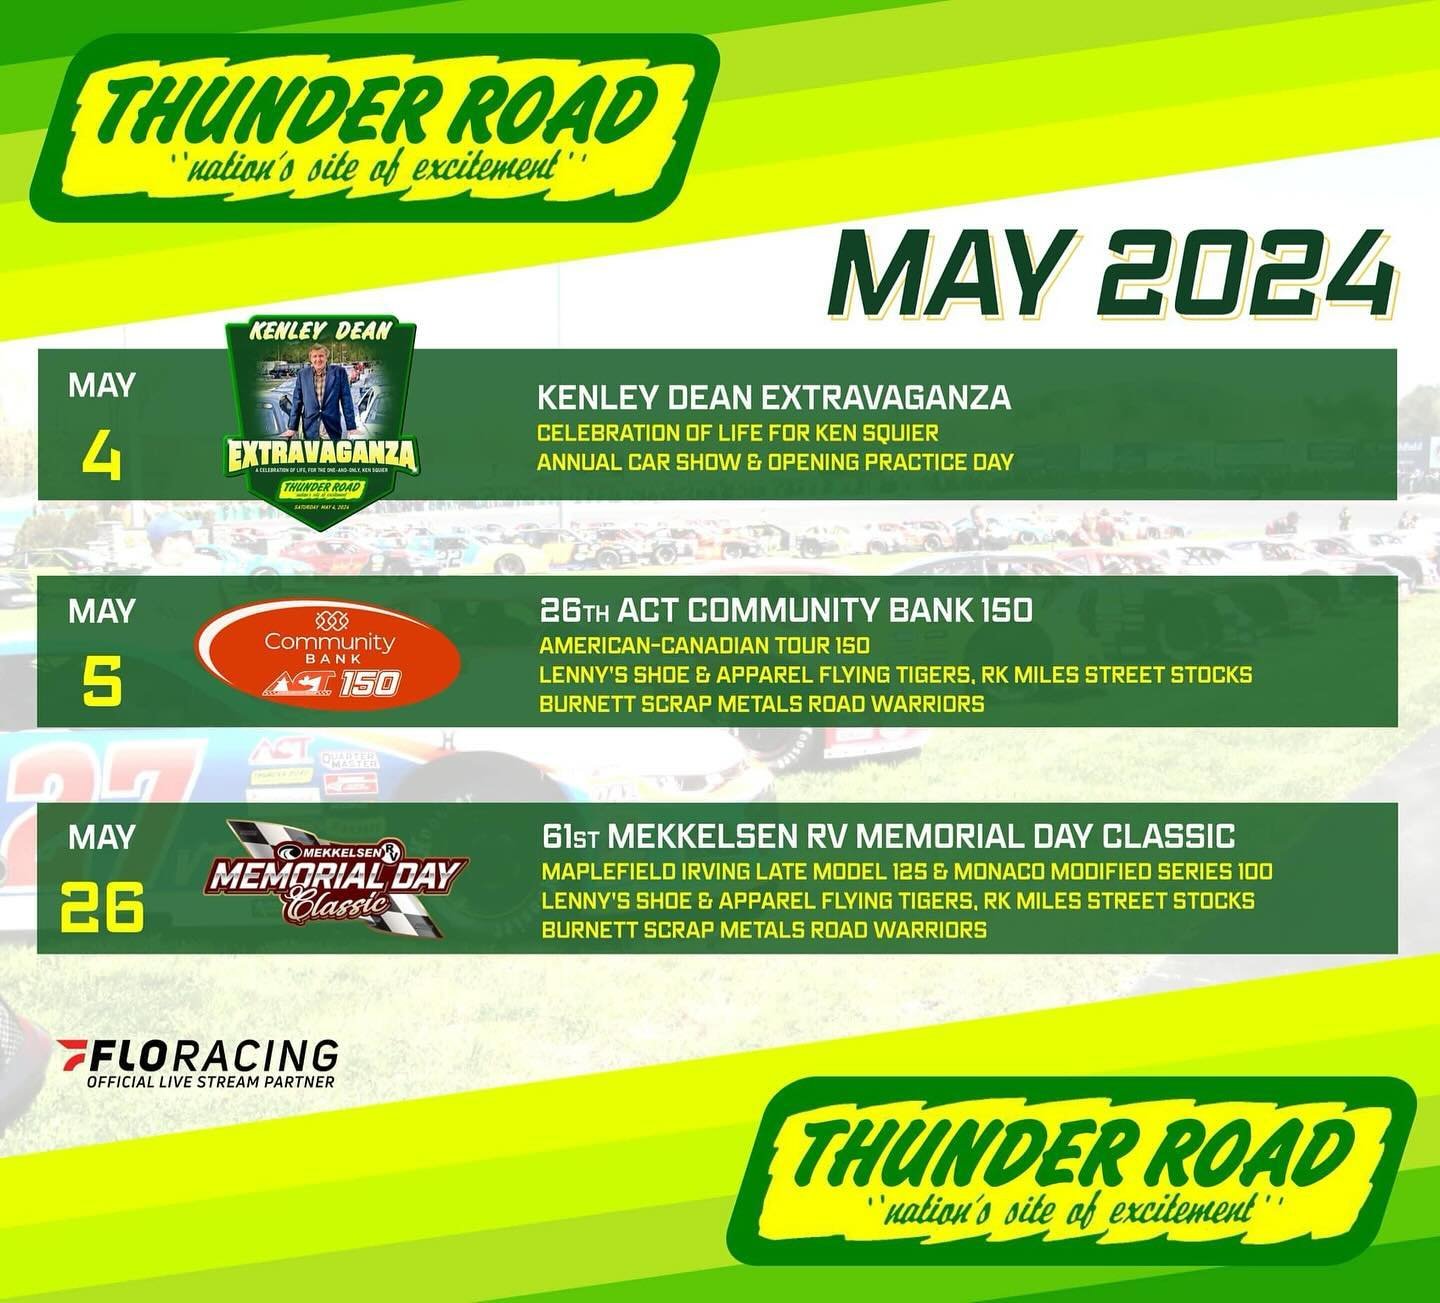 The Month of May at the &ldquo;Nation&rsquo;s Site of Excitement&rdquo; is packed with memorable events and phenomenal races.

Everything just matters more at Thunder Road!

🟢 Saturday May 4th - Kenley Dean Extravaganza w/ Annual Car Show &amp; Prac